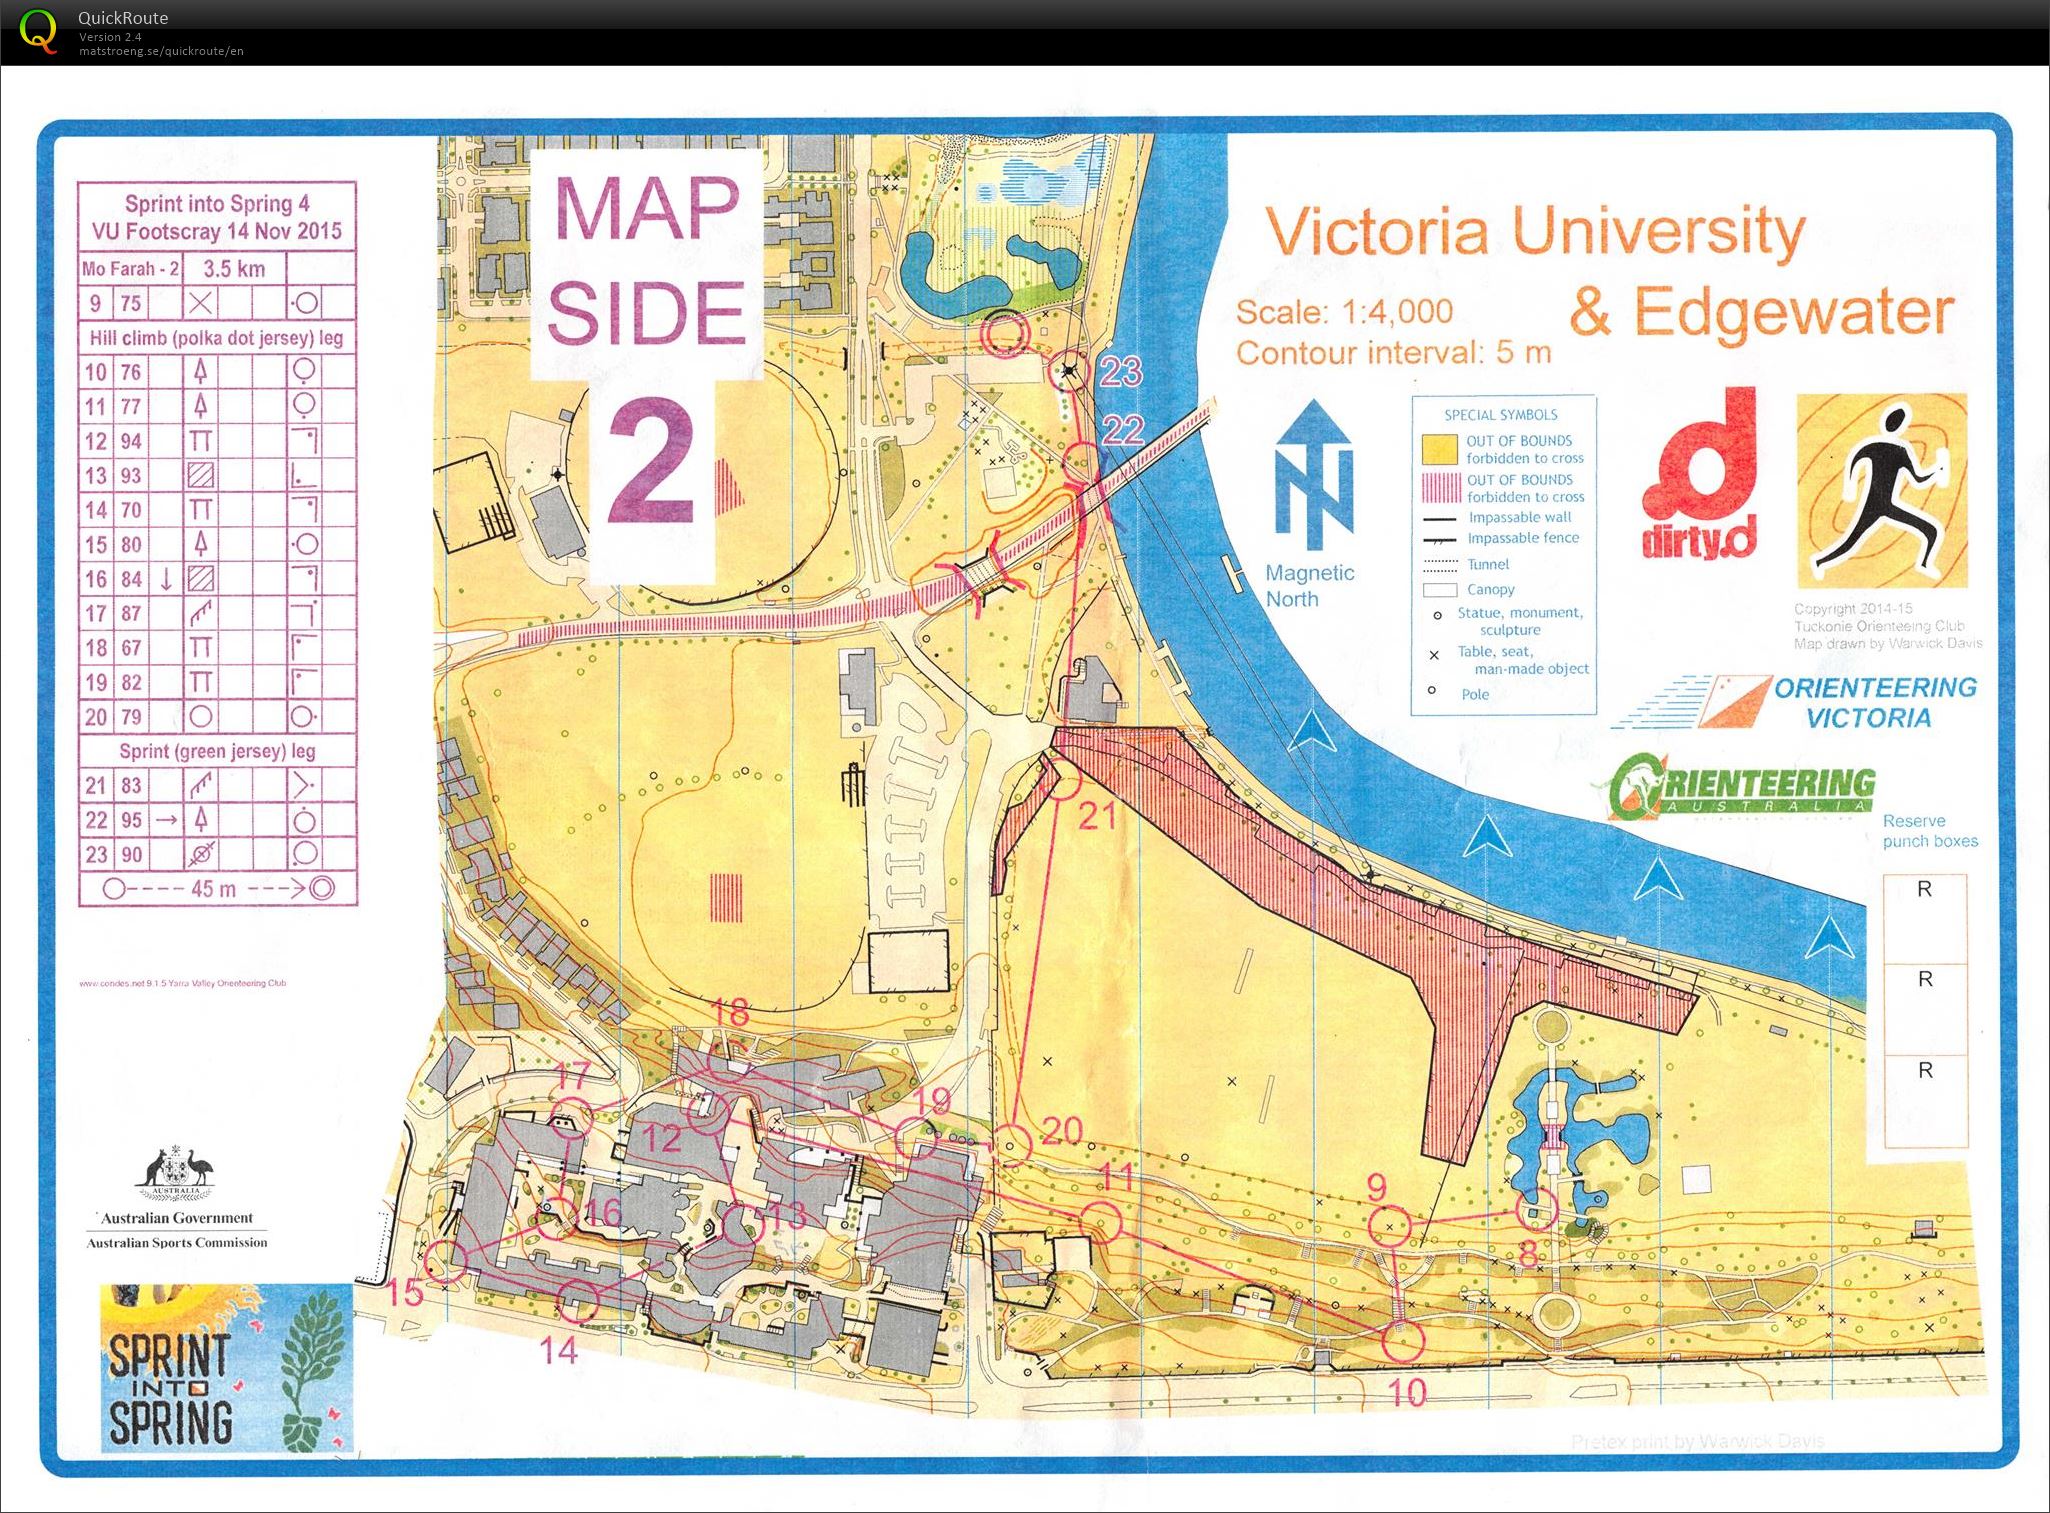 2015 Sprint into Spring Race 4 map 2 (14/11/2015)